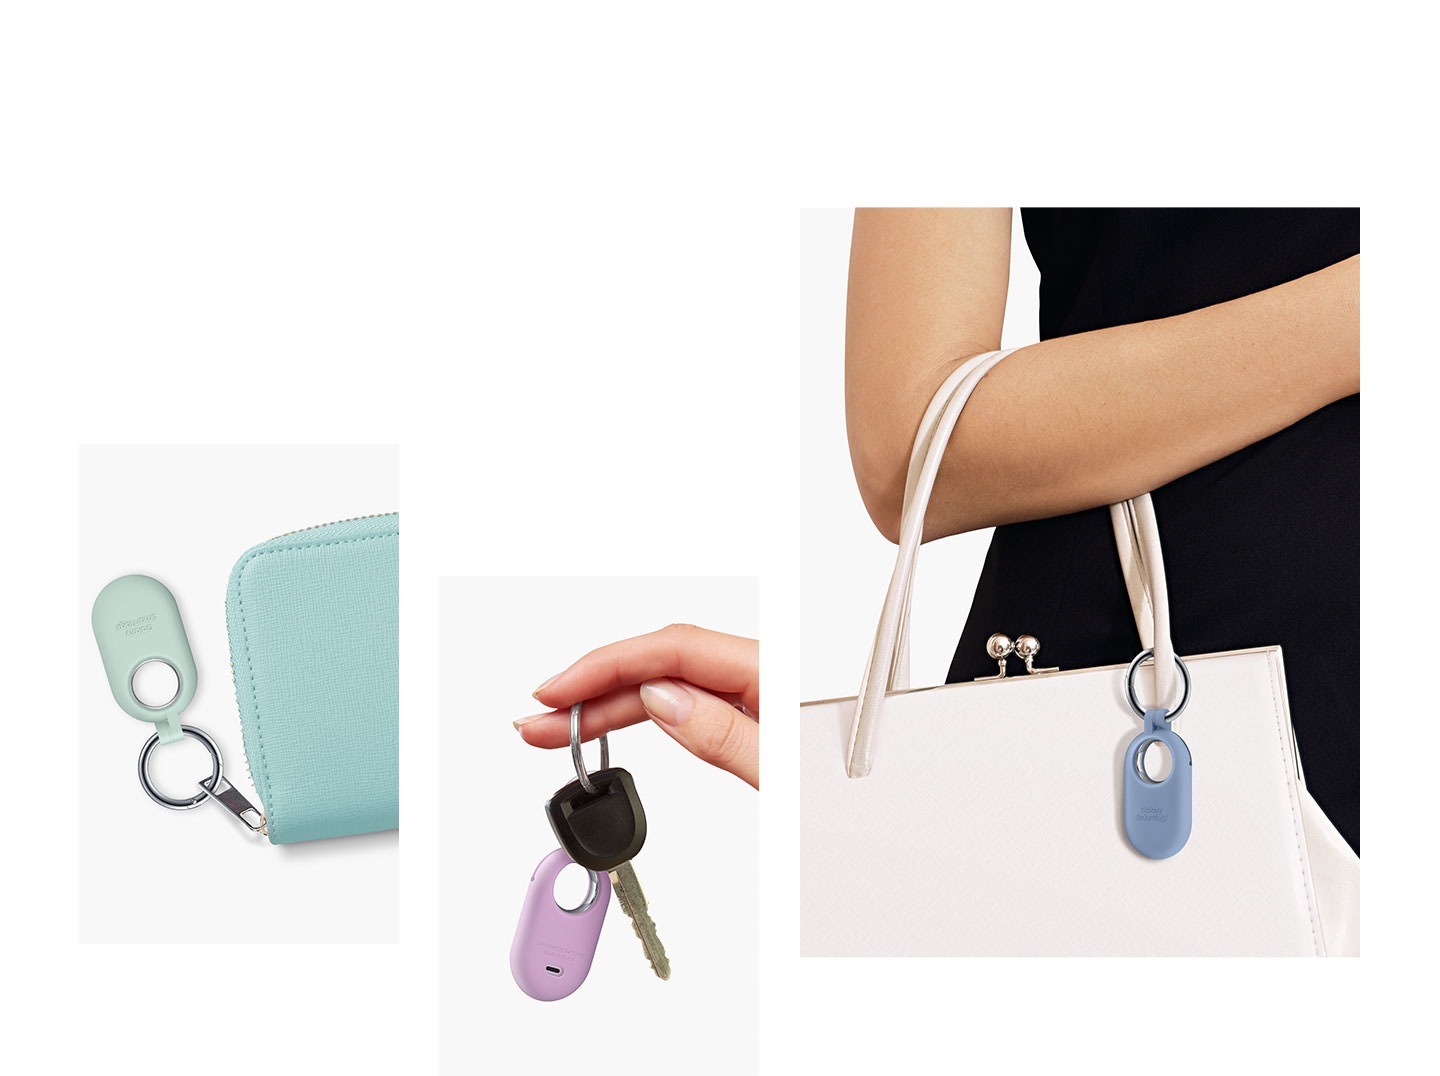 Galaxy SmartTag2 in Mint, Lavender and Blue Silicone Cases can be seen, attached to items such as a wallet, key and handbag.